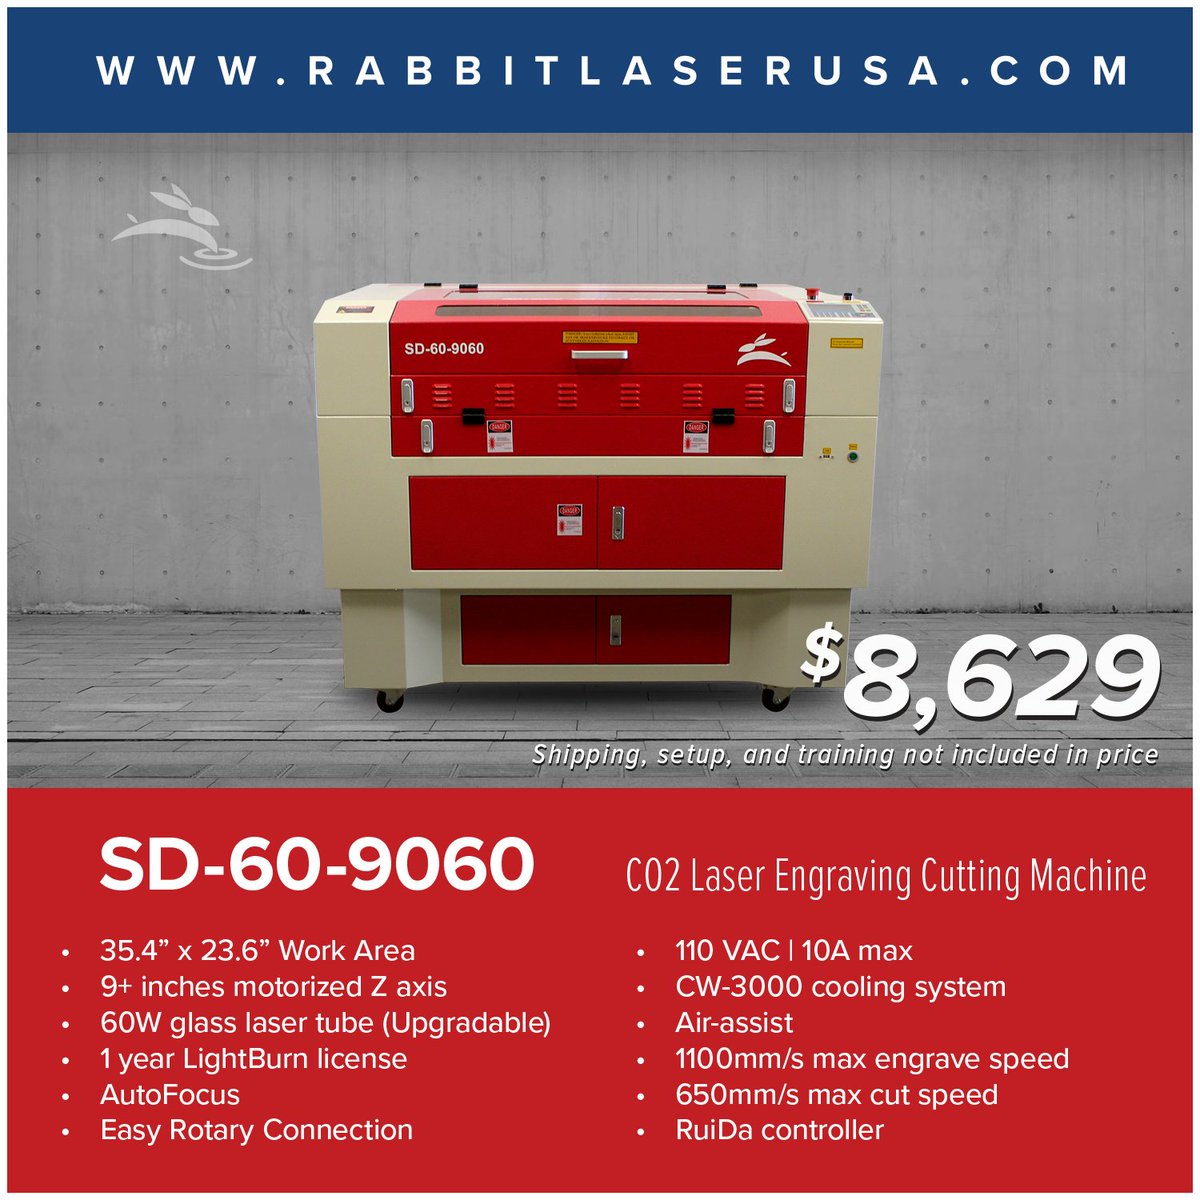 Elevate your craft with the Rabbit Laser SD-60-9060! Ample workspace, pass-through doors, easy maneuverability, precision control, AutoFocus, 60W power, all for just $8629. Unleash your creativity today!